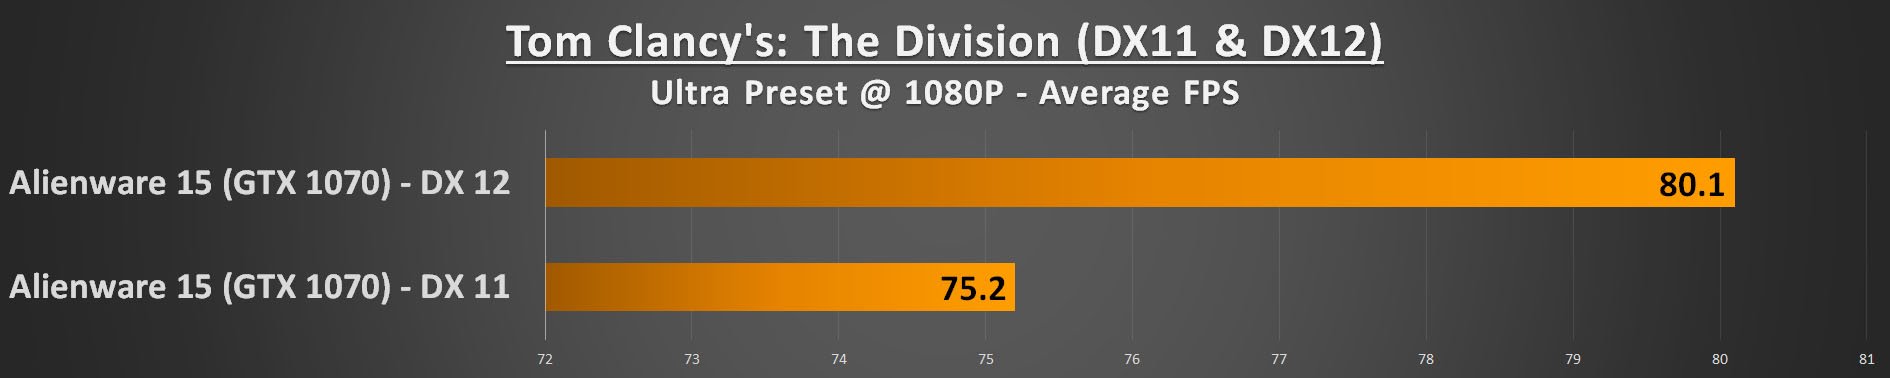 Alienware 15 R3 Performance - The Division